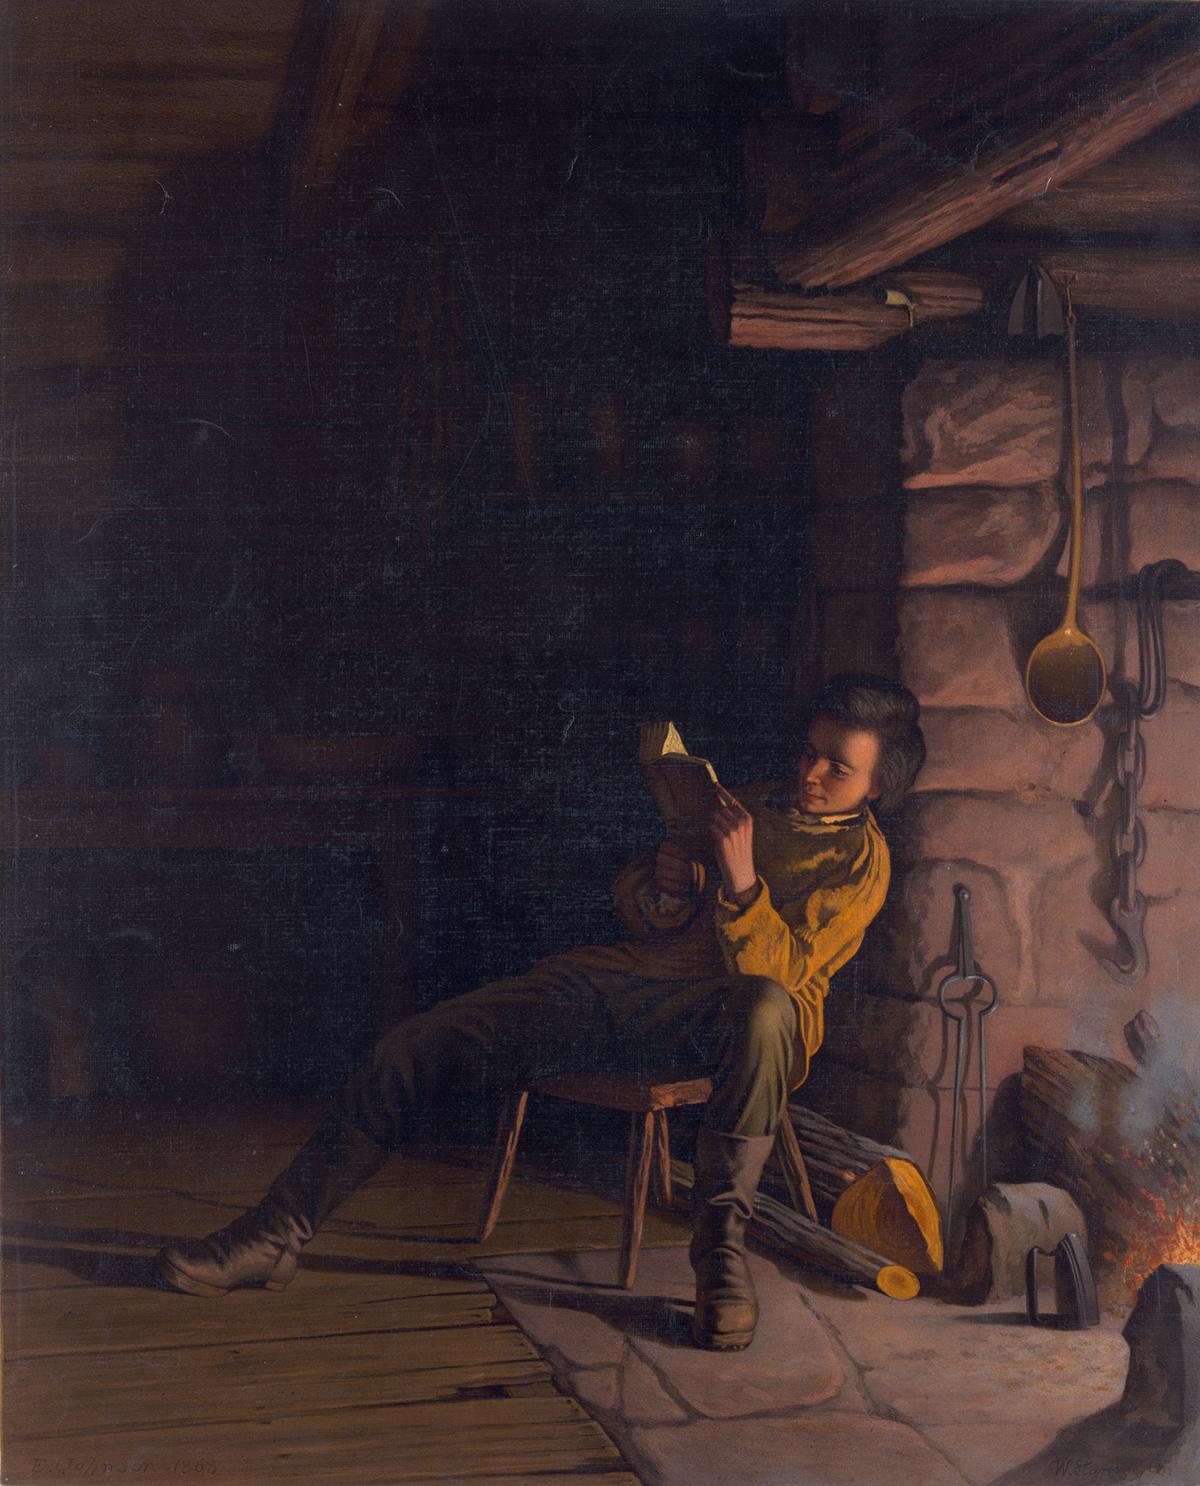 A young Abraham Lincoln reading by the fire, 1868, by Eastman Johnson. Library of Congress. (Public Domain)